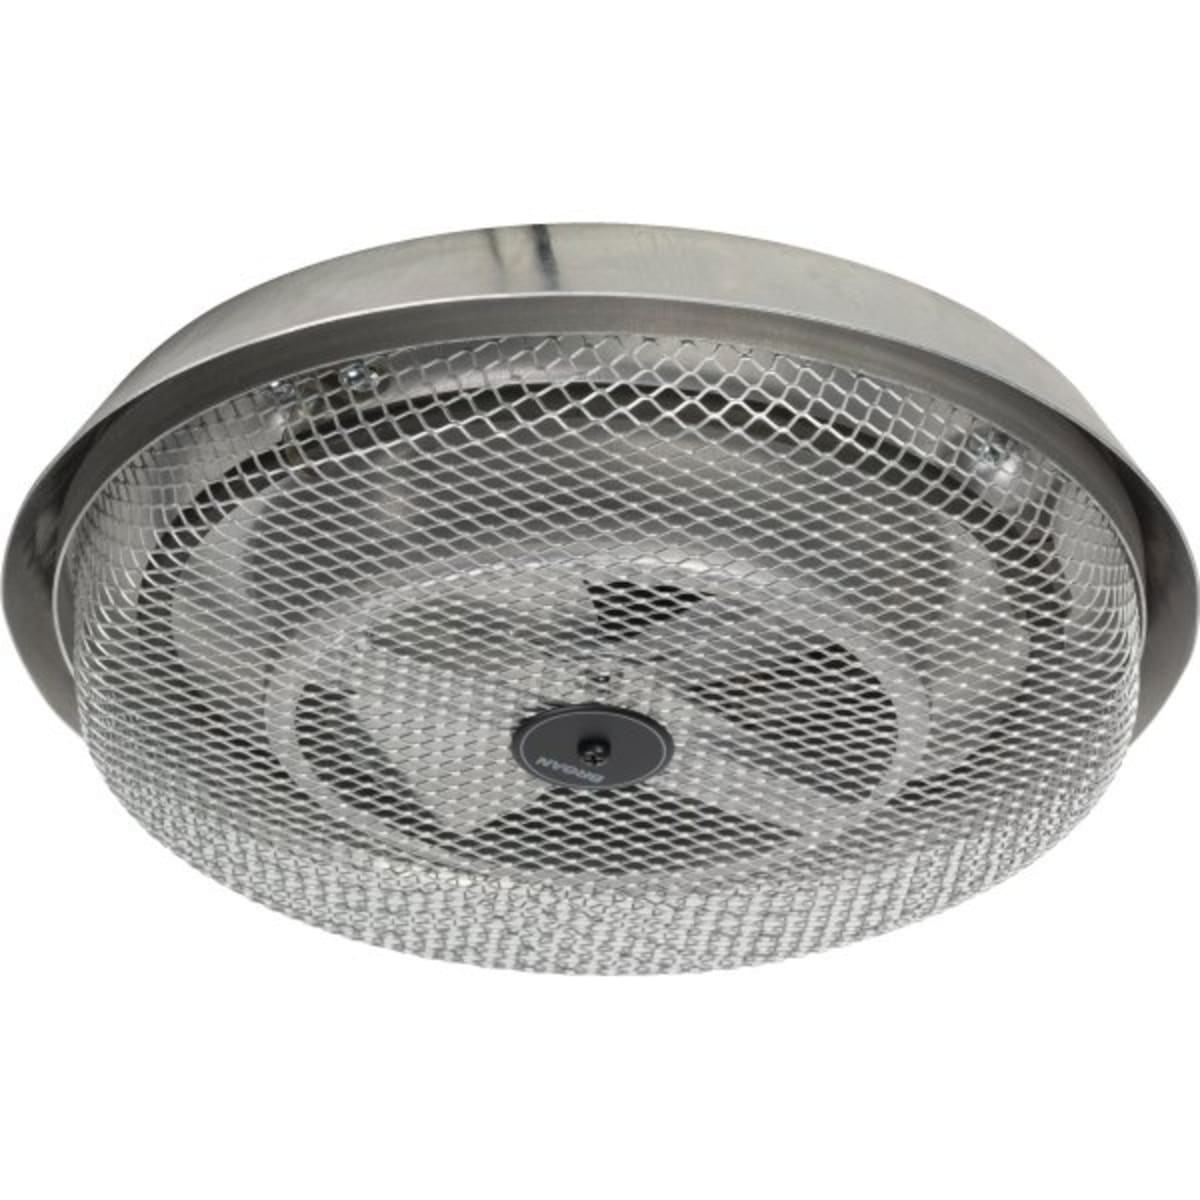 Broan Ceiling Heater Fan Forced Surface Mount 1250W Enclosed Sheathed Element